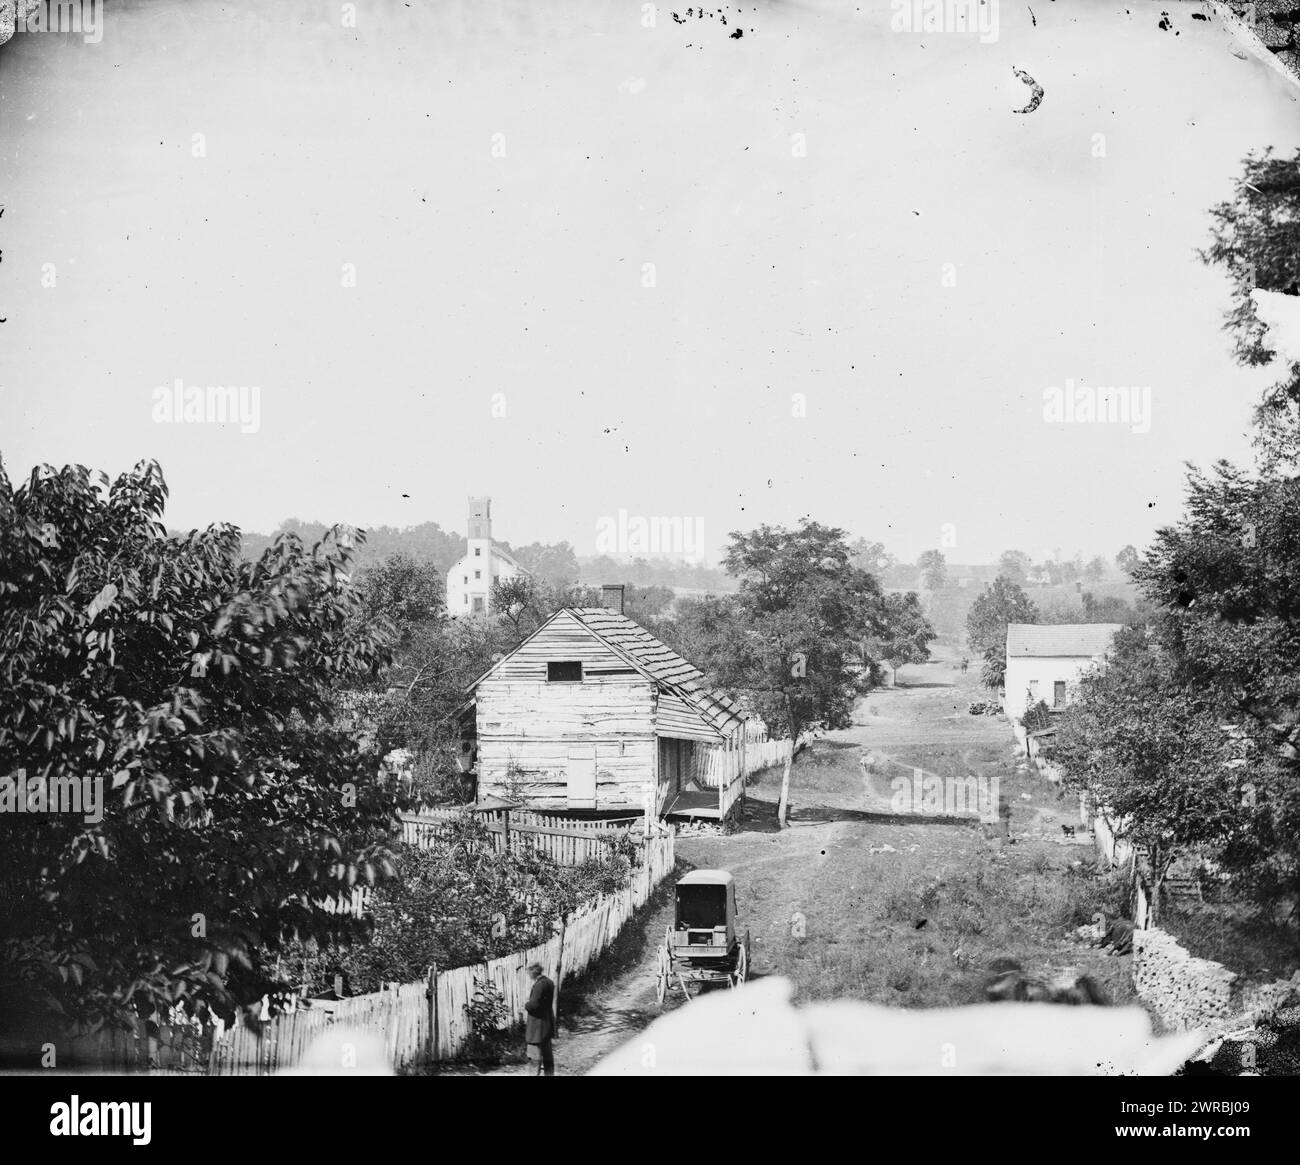 Sharpsburg, Md. View with Episcopal church in distance, Photograph from the main eastern theater of the war, Battle of Antietam, September-October 1862., Gardner, Alexander, 1821-1882, photographer, 1862 September., United States, History, Civil War, 1861-1865, Glass negatives, 1860-1870., Stereographs, 1860-1870, Glass negatives, 1860-1870, 1 negative: glass, stereograph, wet collodion, 4 x 10 in Stock Photo